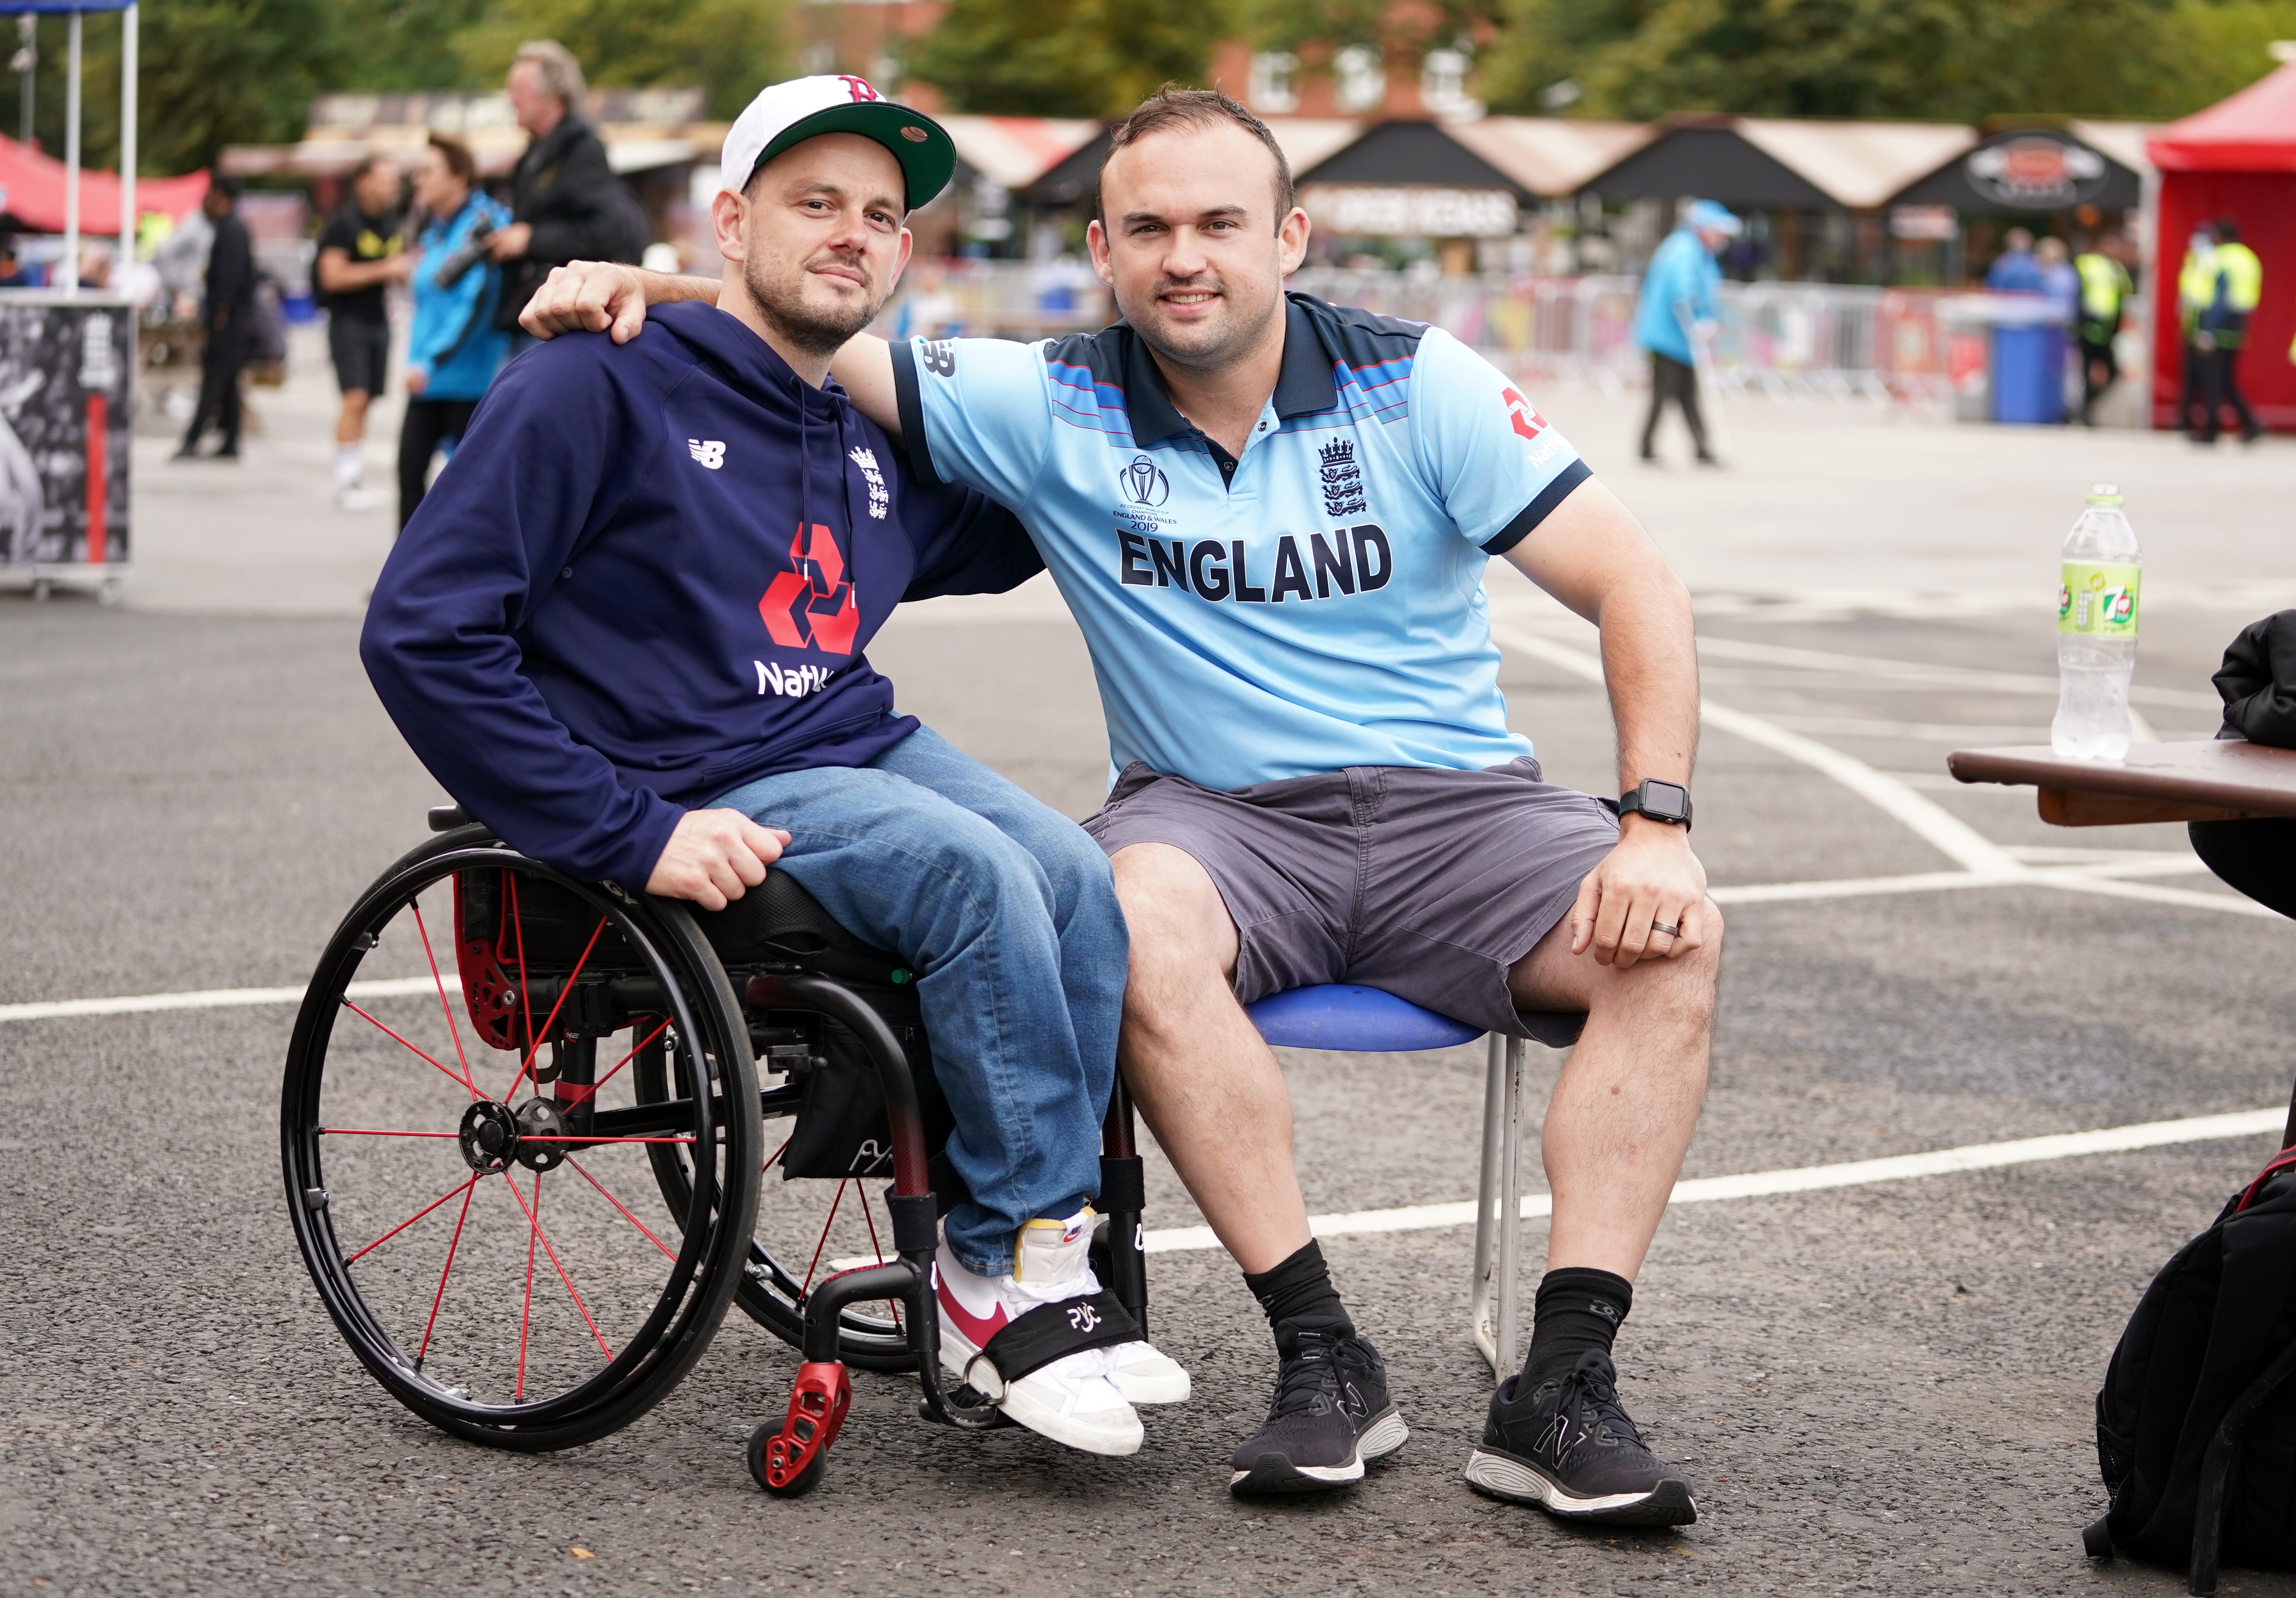 Cricket fans James and Paul (right) outside Emirates Old Trafford in Manchester after India forfeited the fifth Test against England over Covid concerns, the England and Wales Cricket Board has announced. Picture date: Friday September 10, 2021.